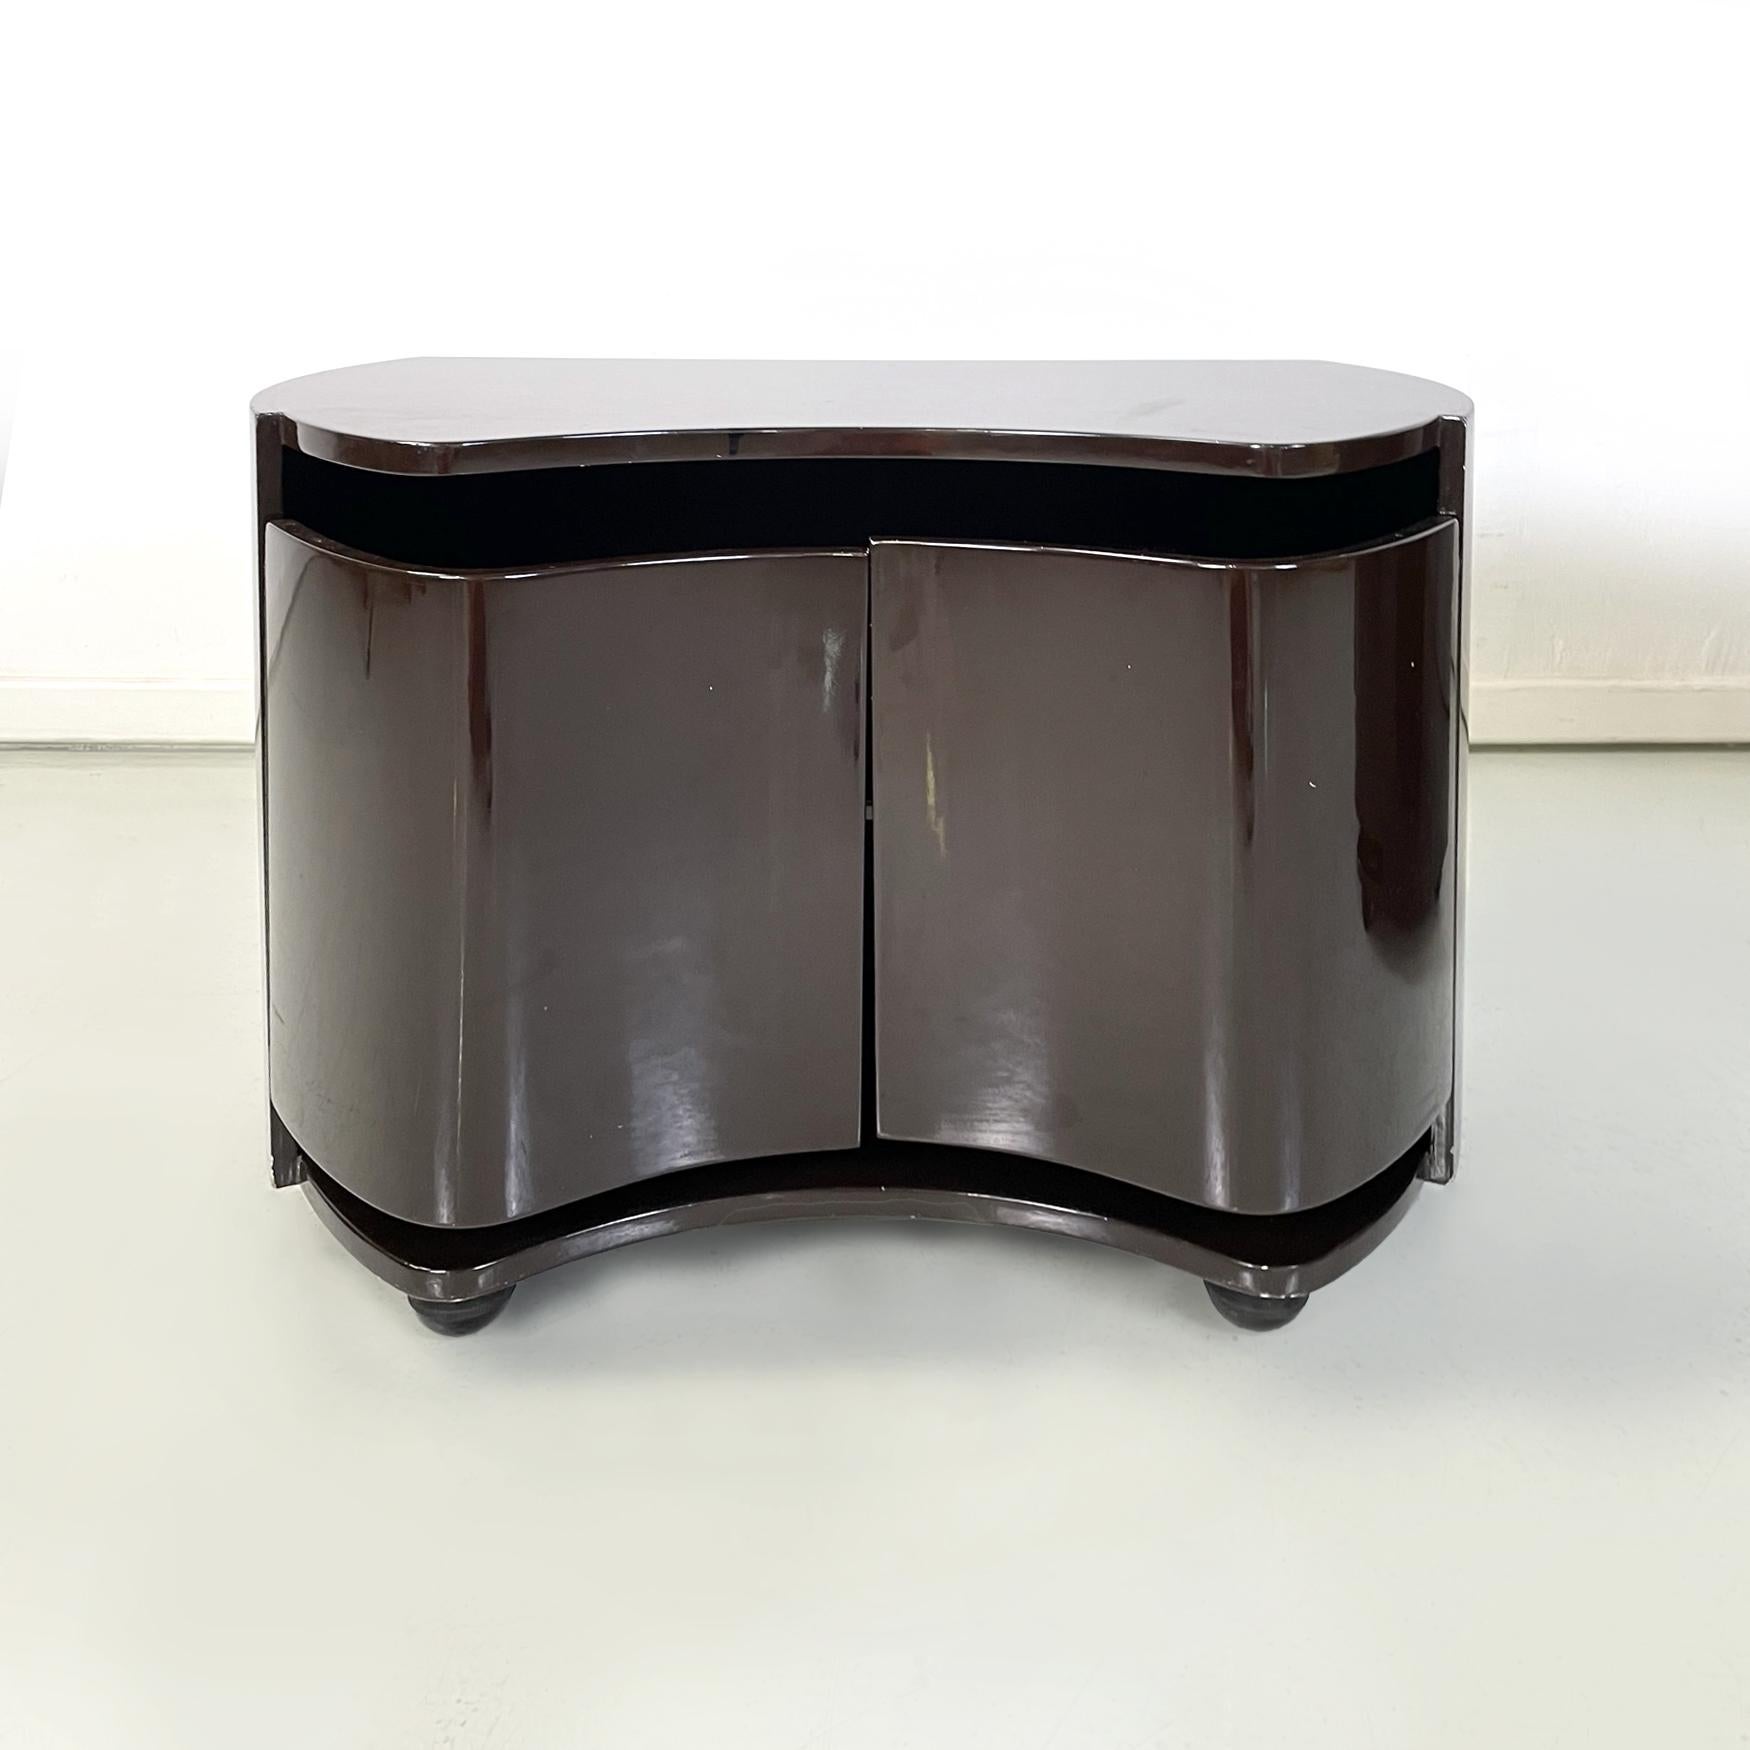 Italian modern Dark brown lacquered wood bed side table Aiace by Benatti, 1970s In Fair Condition For Sale In MIlano, IT